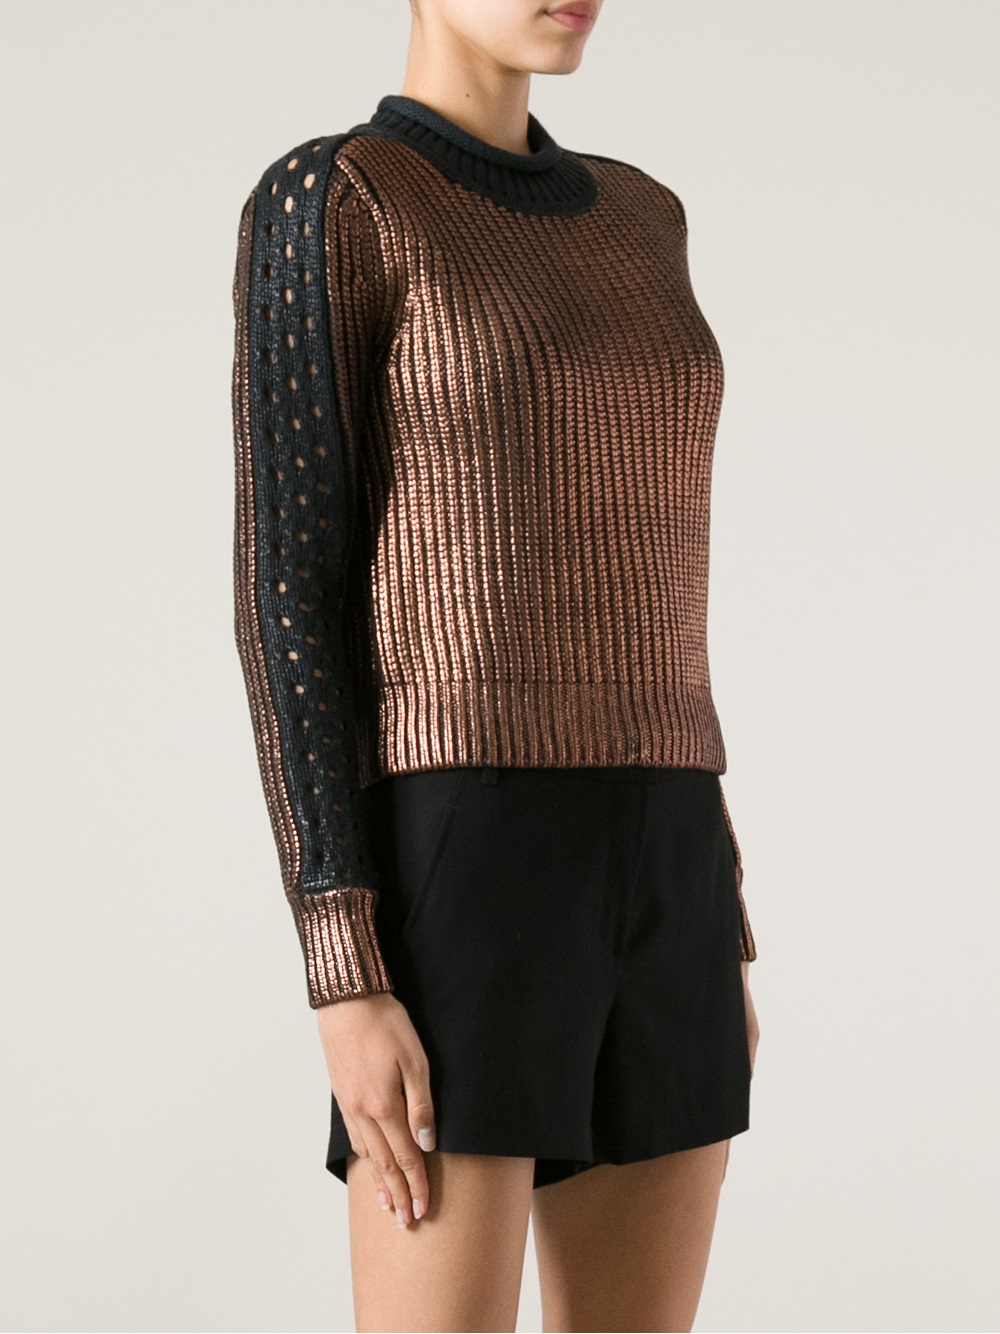 3.1 Phillip Lim Ribbed Knit Sweater in Metallic - Lyst